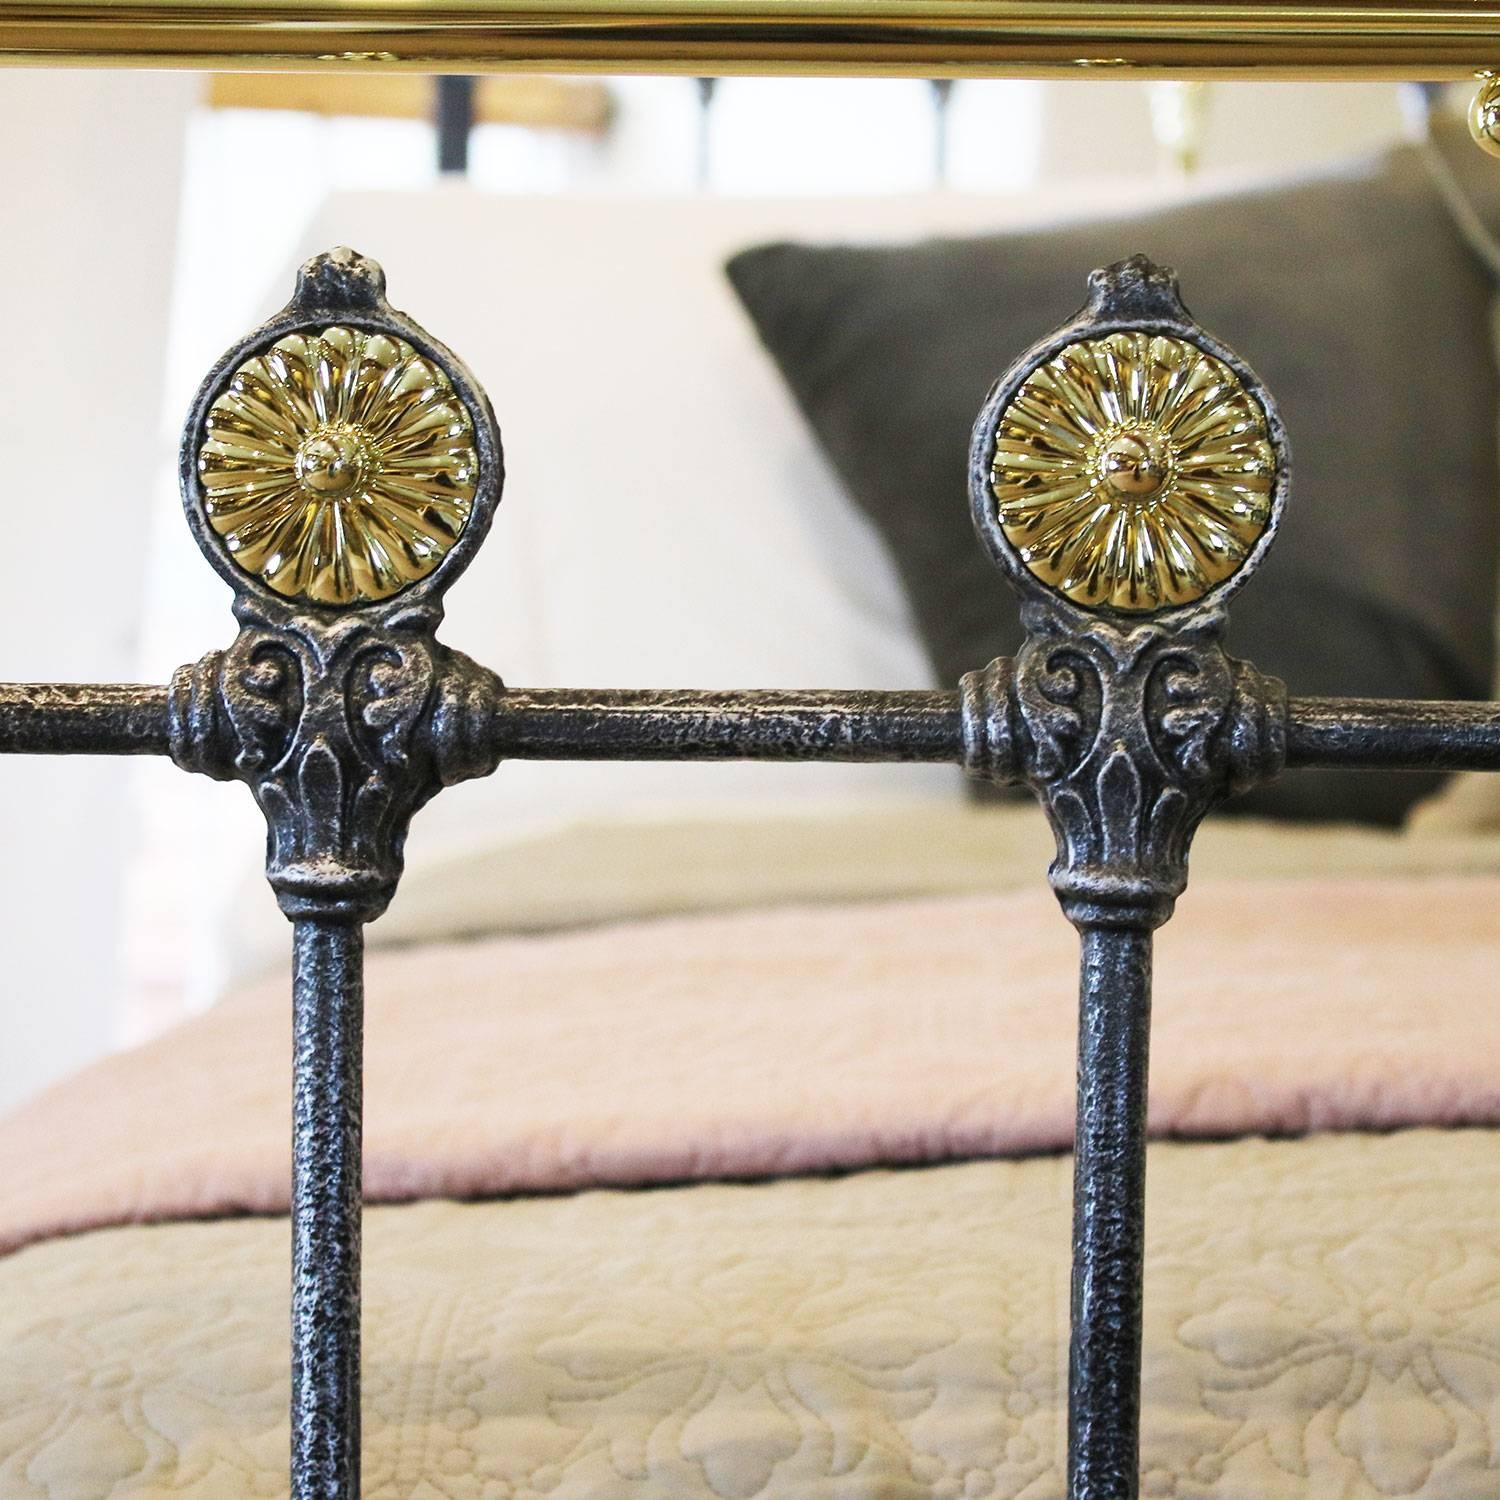 19th Century Brass and Iron Decorative Bedstead in Charcoal, MK134